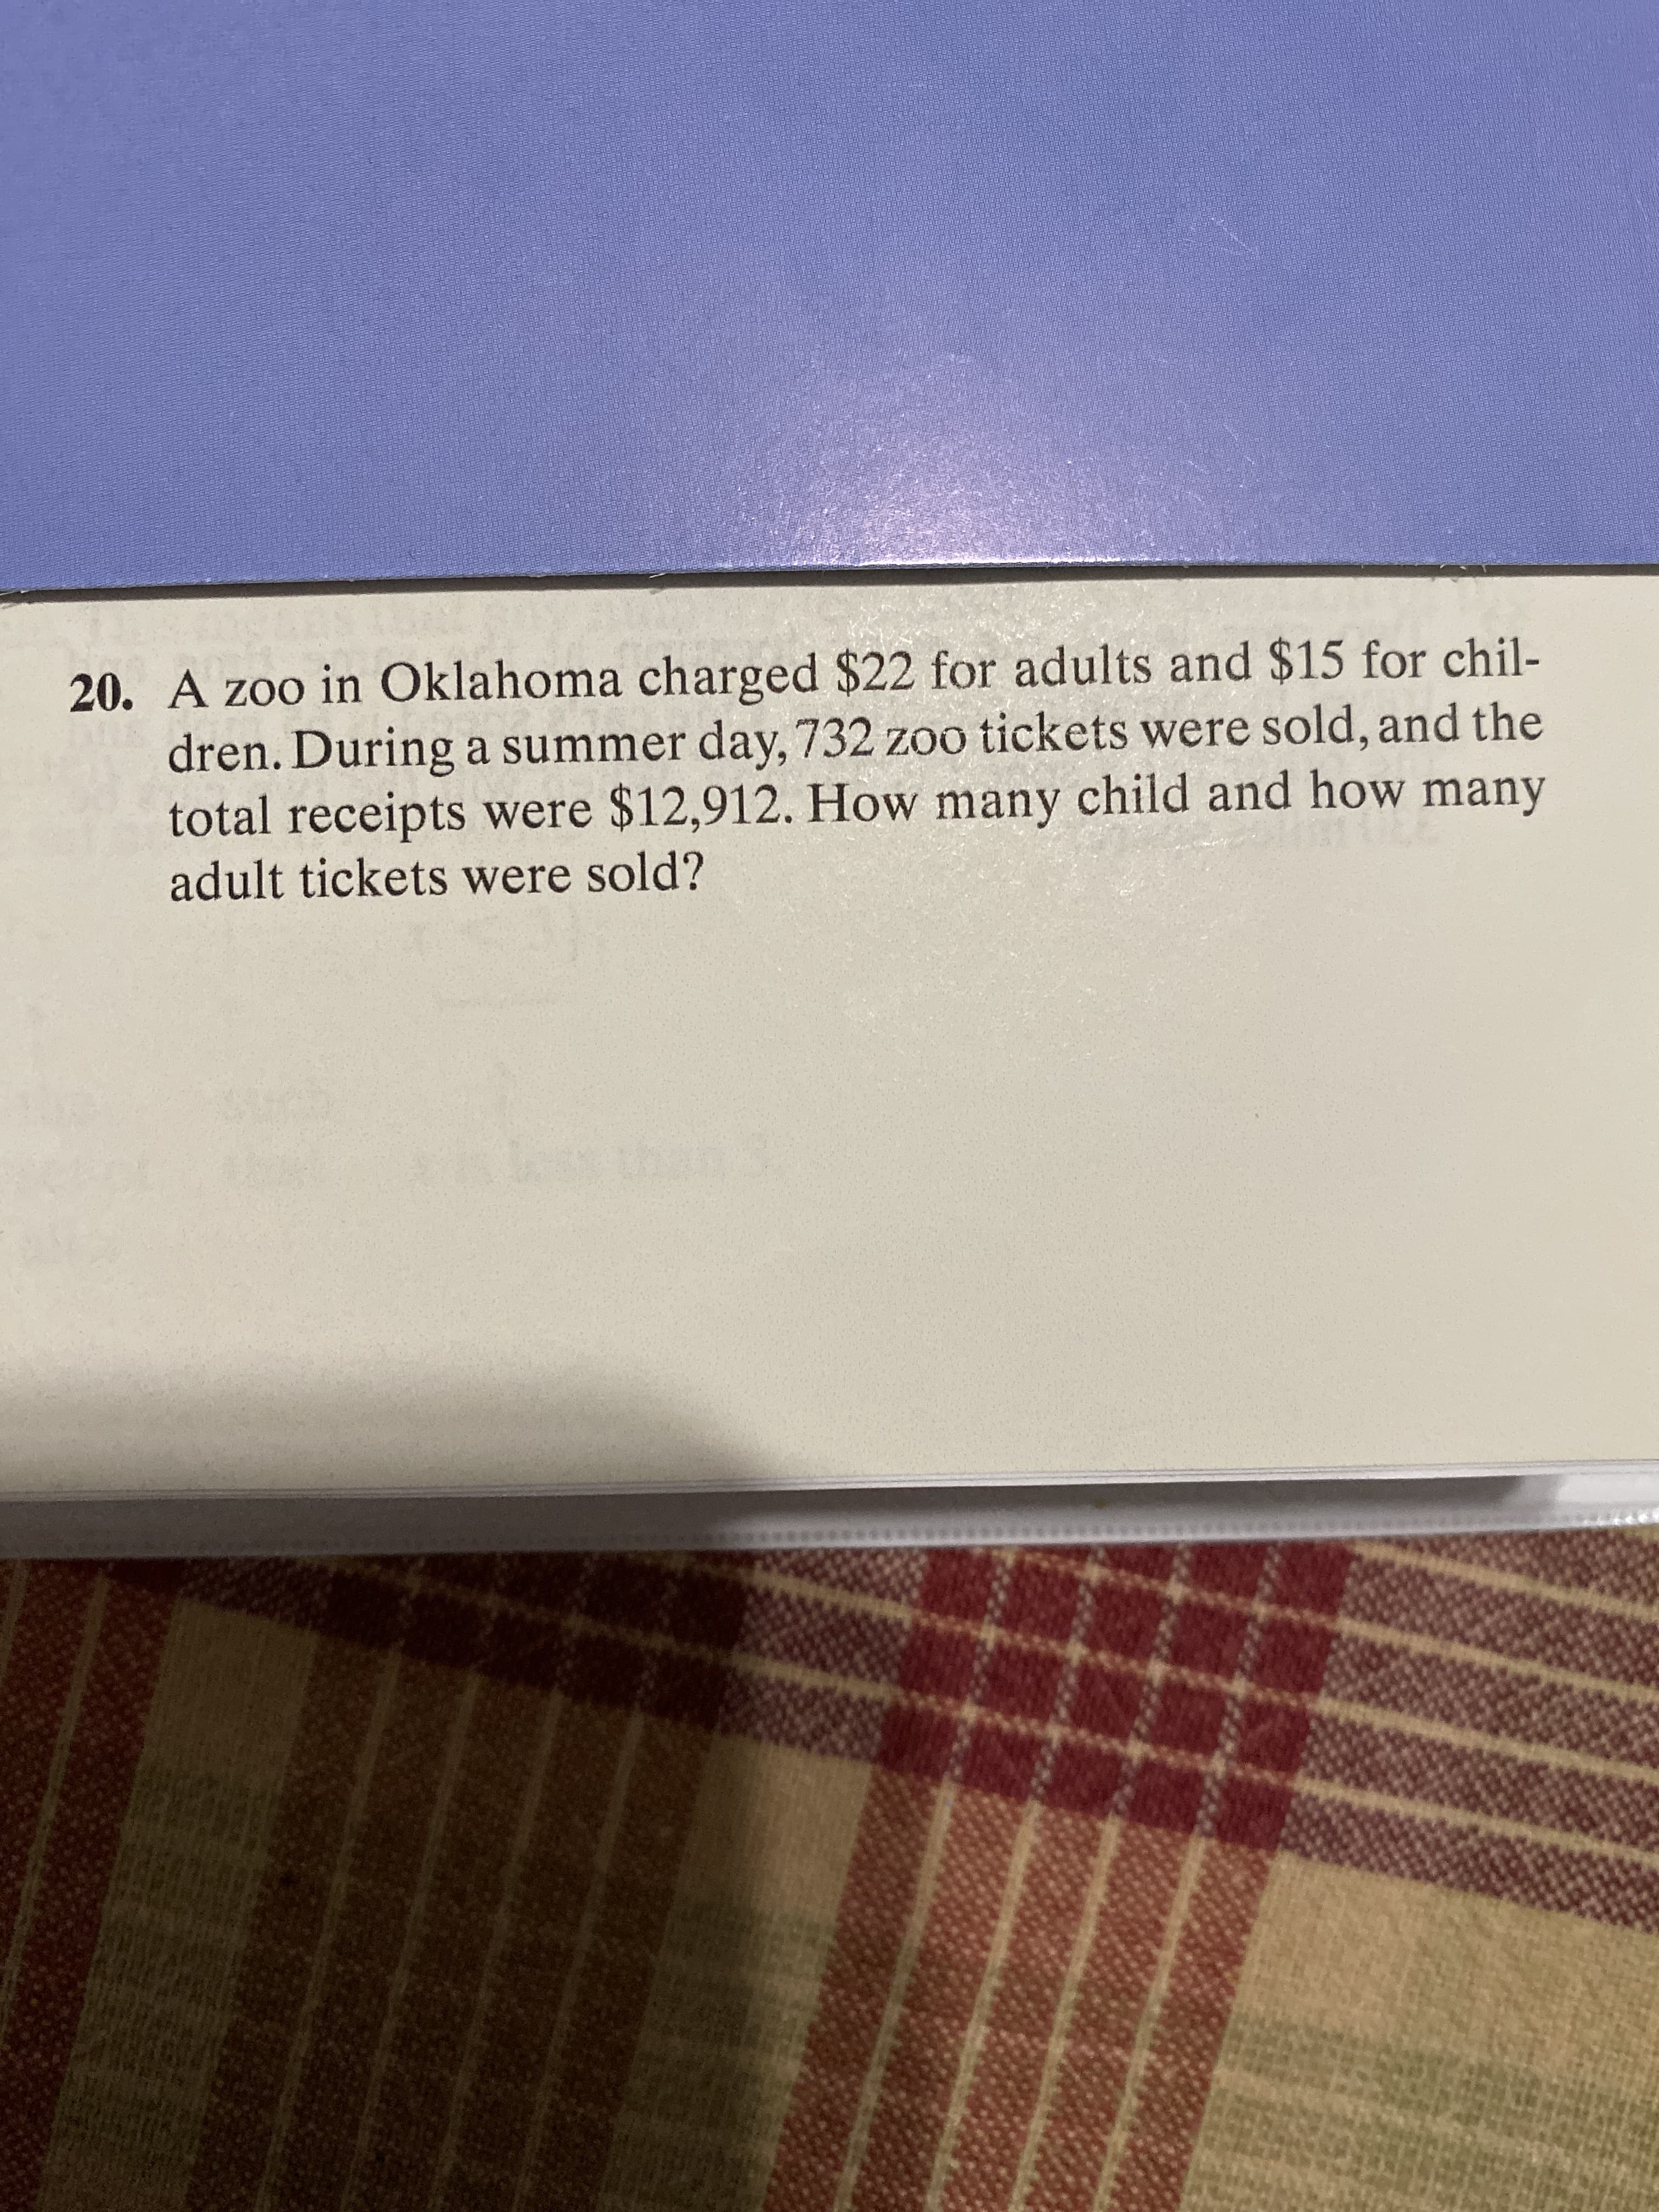 20. A zoo in Oklahoma charged $22 for adults and $15 for chil-
dren. During a summer day, 732 zoo tickets were sold, and the
total receipts were $12,912. How many child and how many
adult tickets were sold?
an 3
